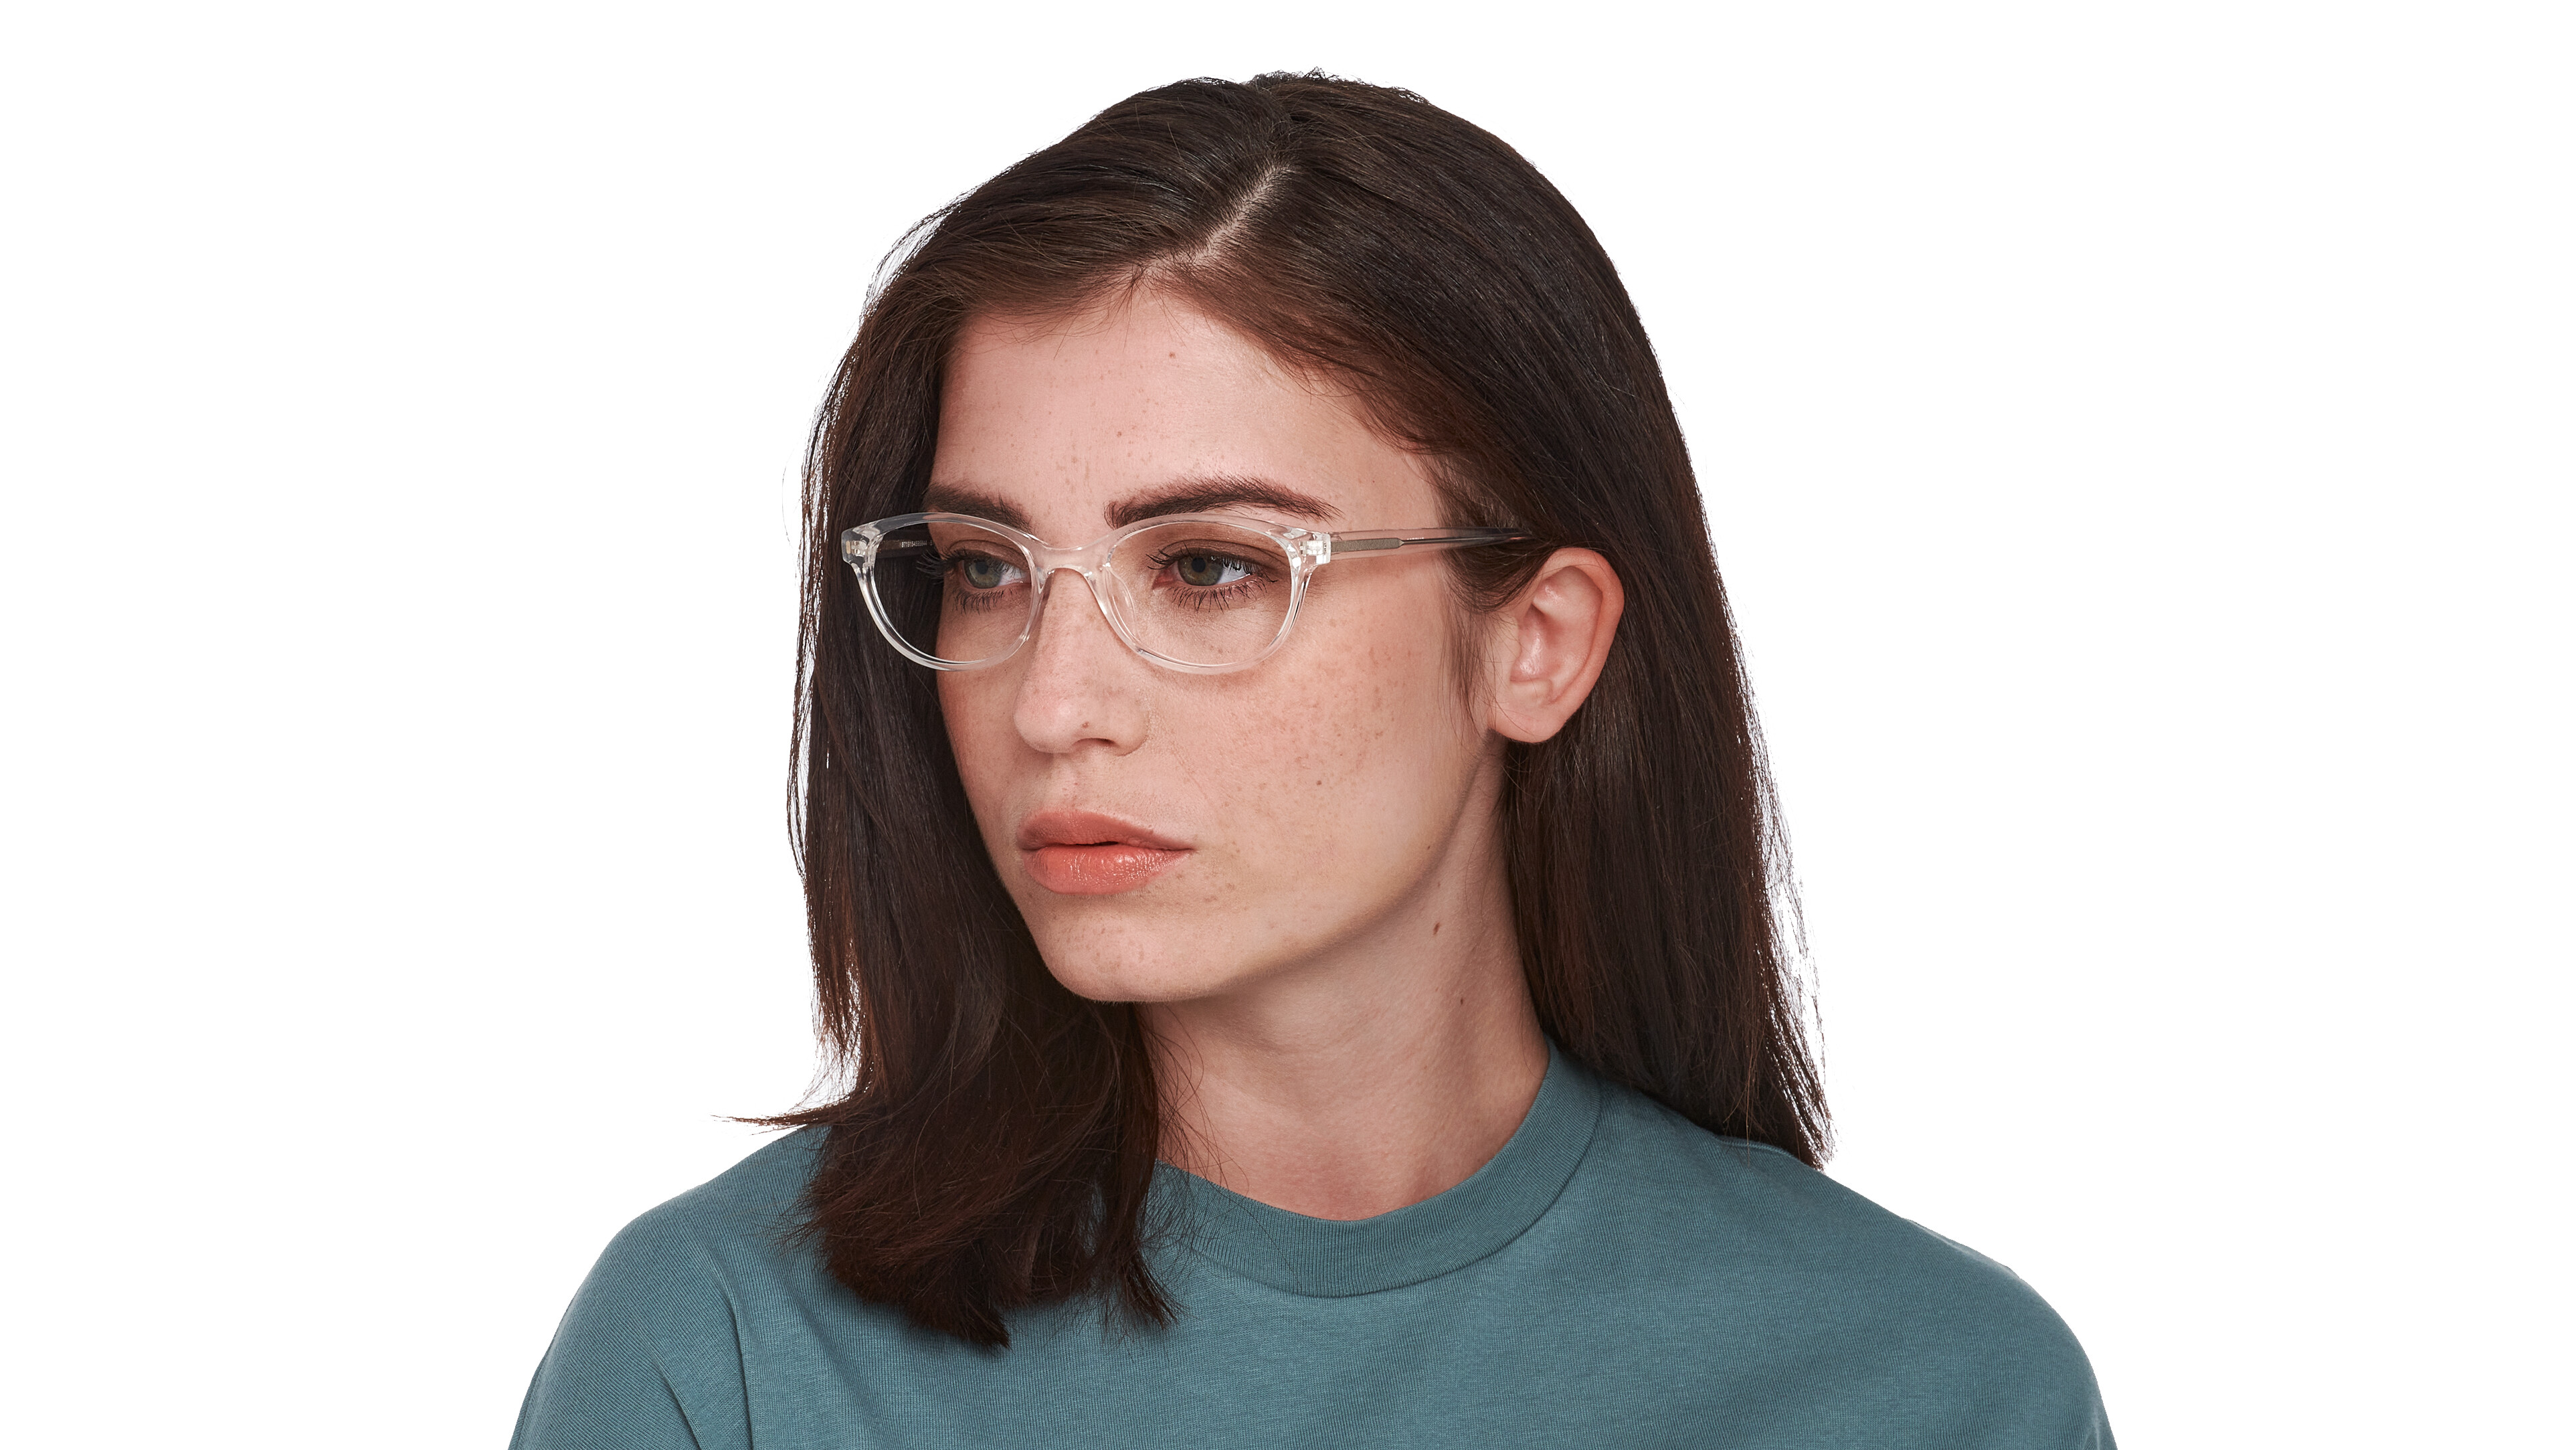 [products.image.on_model_female02] Seen SNEF09 XX Brille